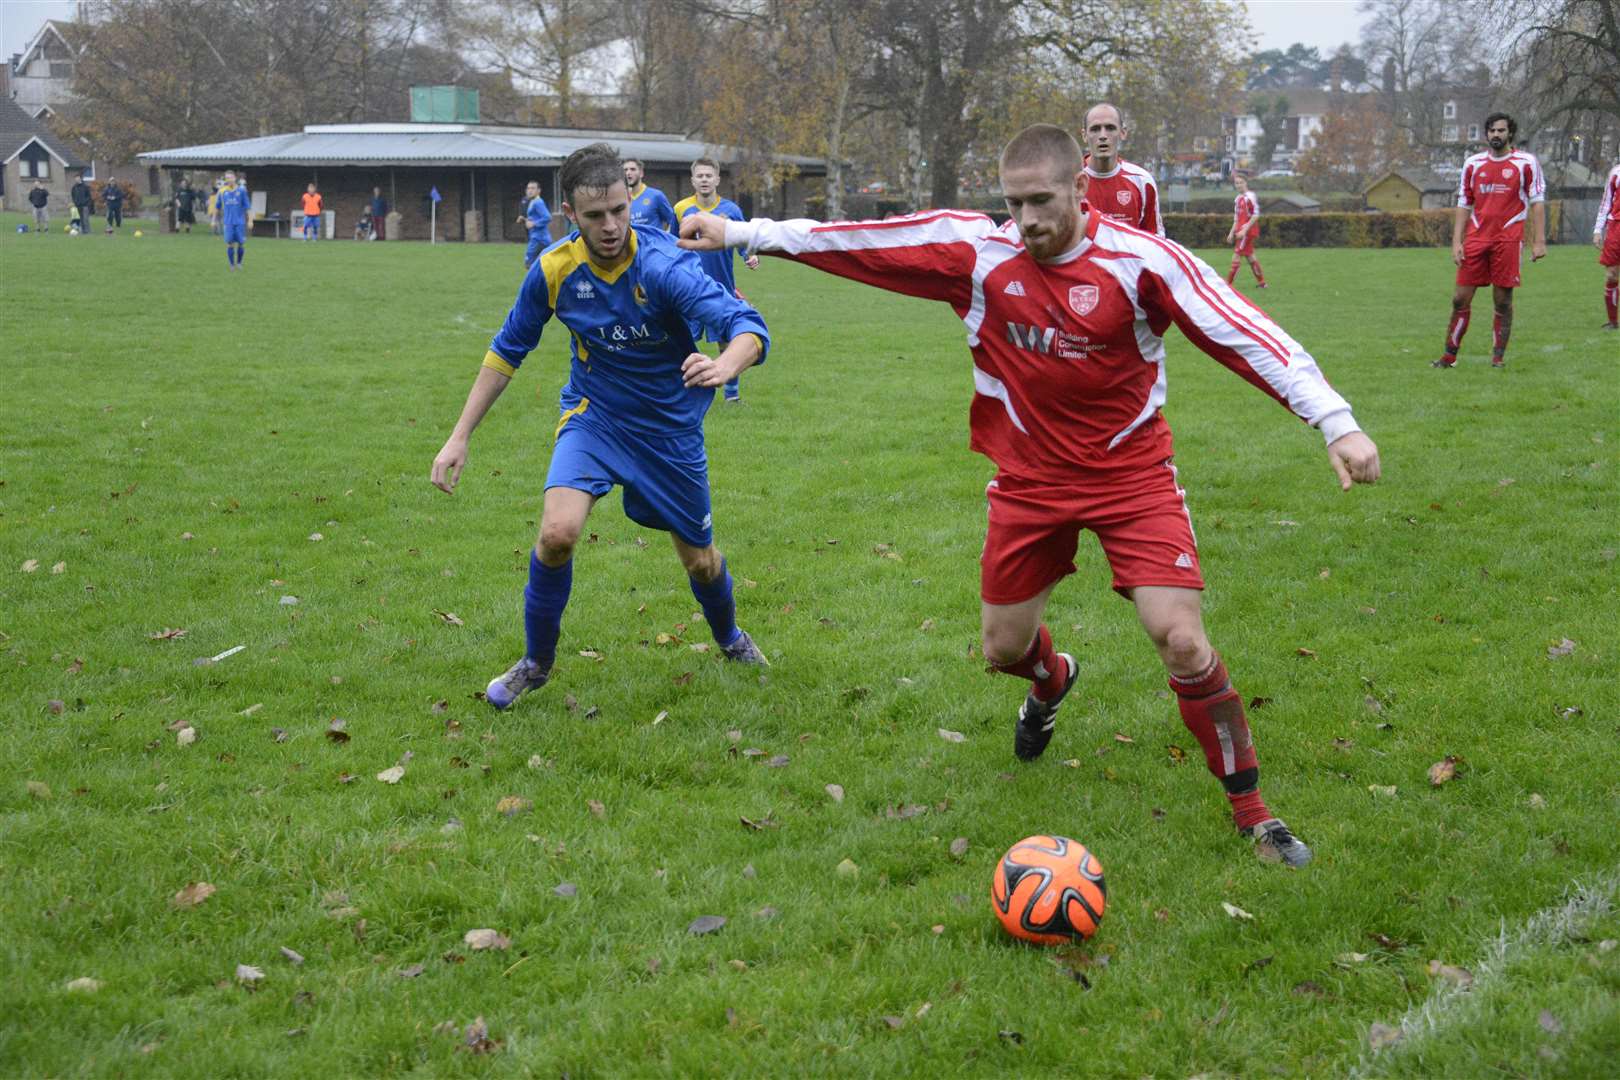 Footballers of all ages use the Tenterden Recreation Ground pitch for home games